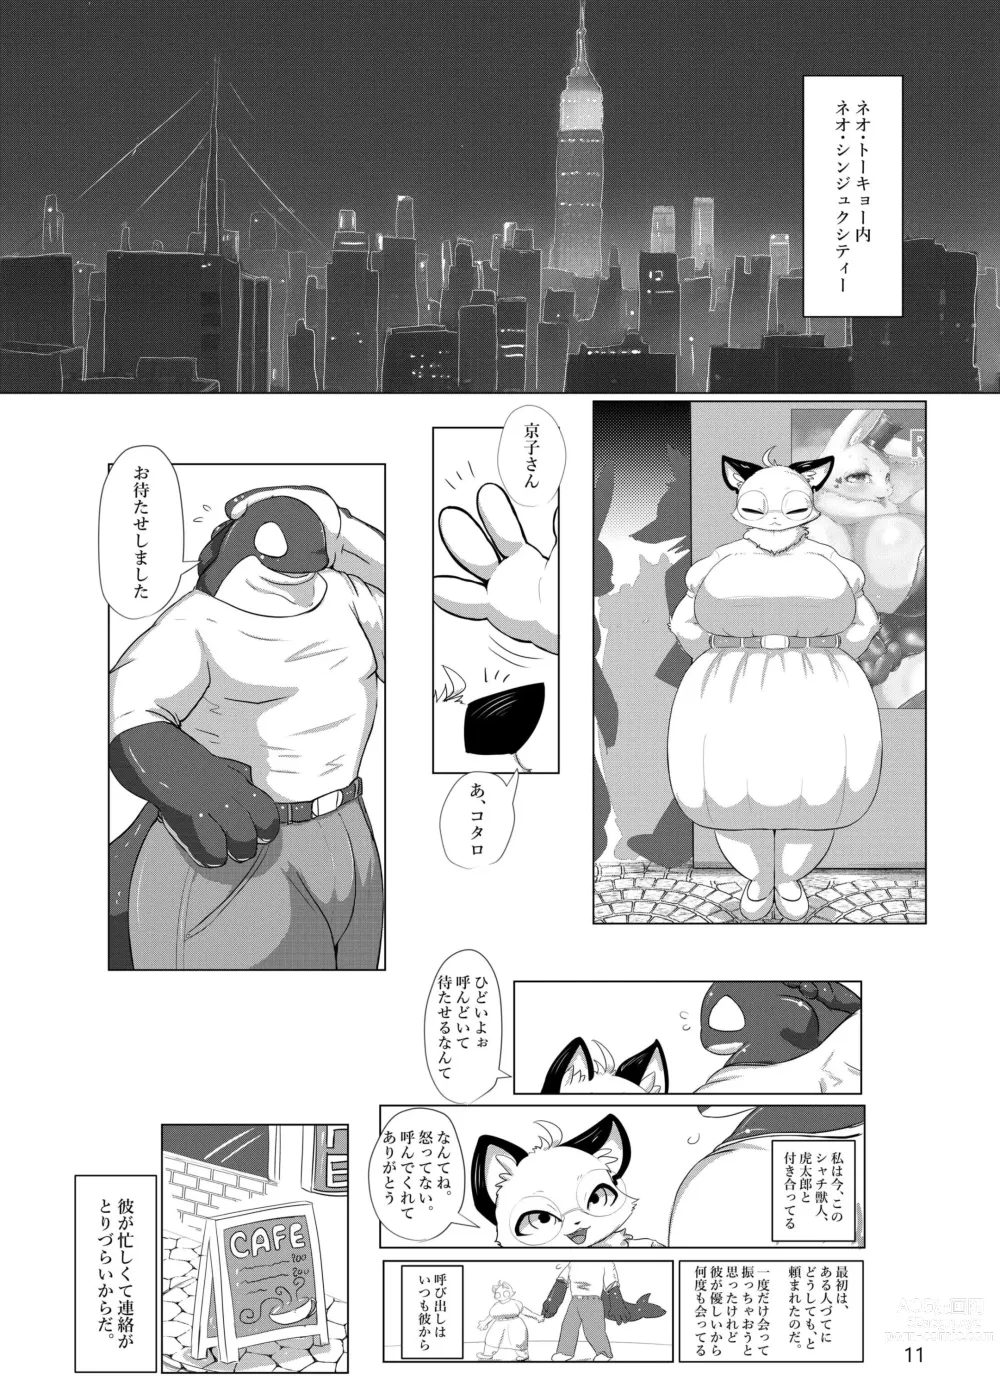 Page 10 of doujinshi the Dream